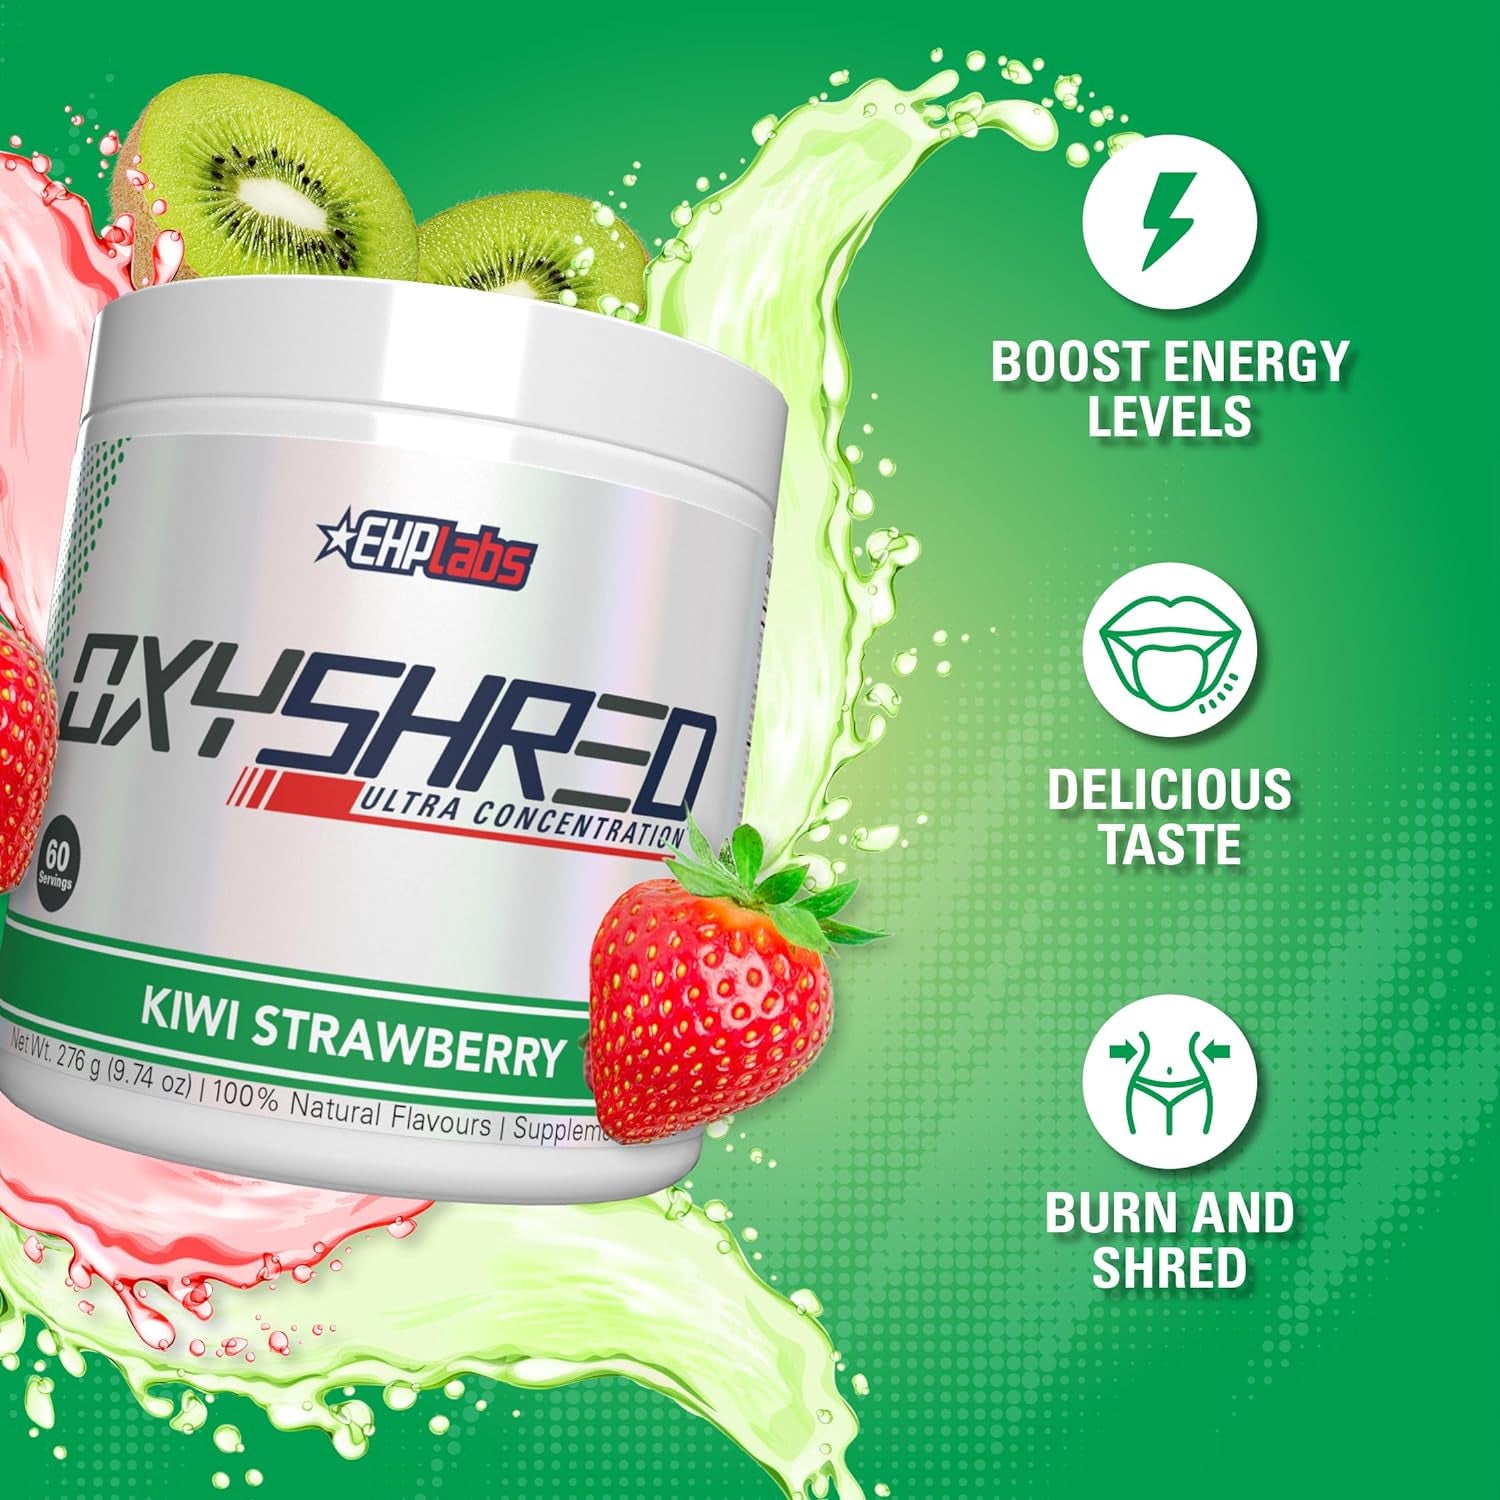 Ehplabs Oxyshred Ultra Concentration Shredding Supplement - Clinically Proven Pre Workout Powder with L Glutamine & Acetyl L Carnitine, Energy Boost Drink - Kiwi Strawberry, 60 Servings